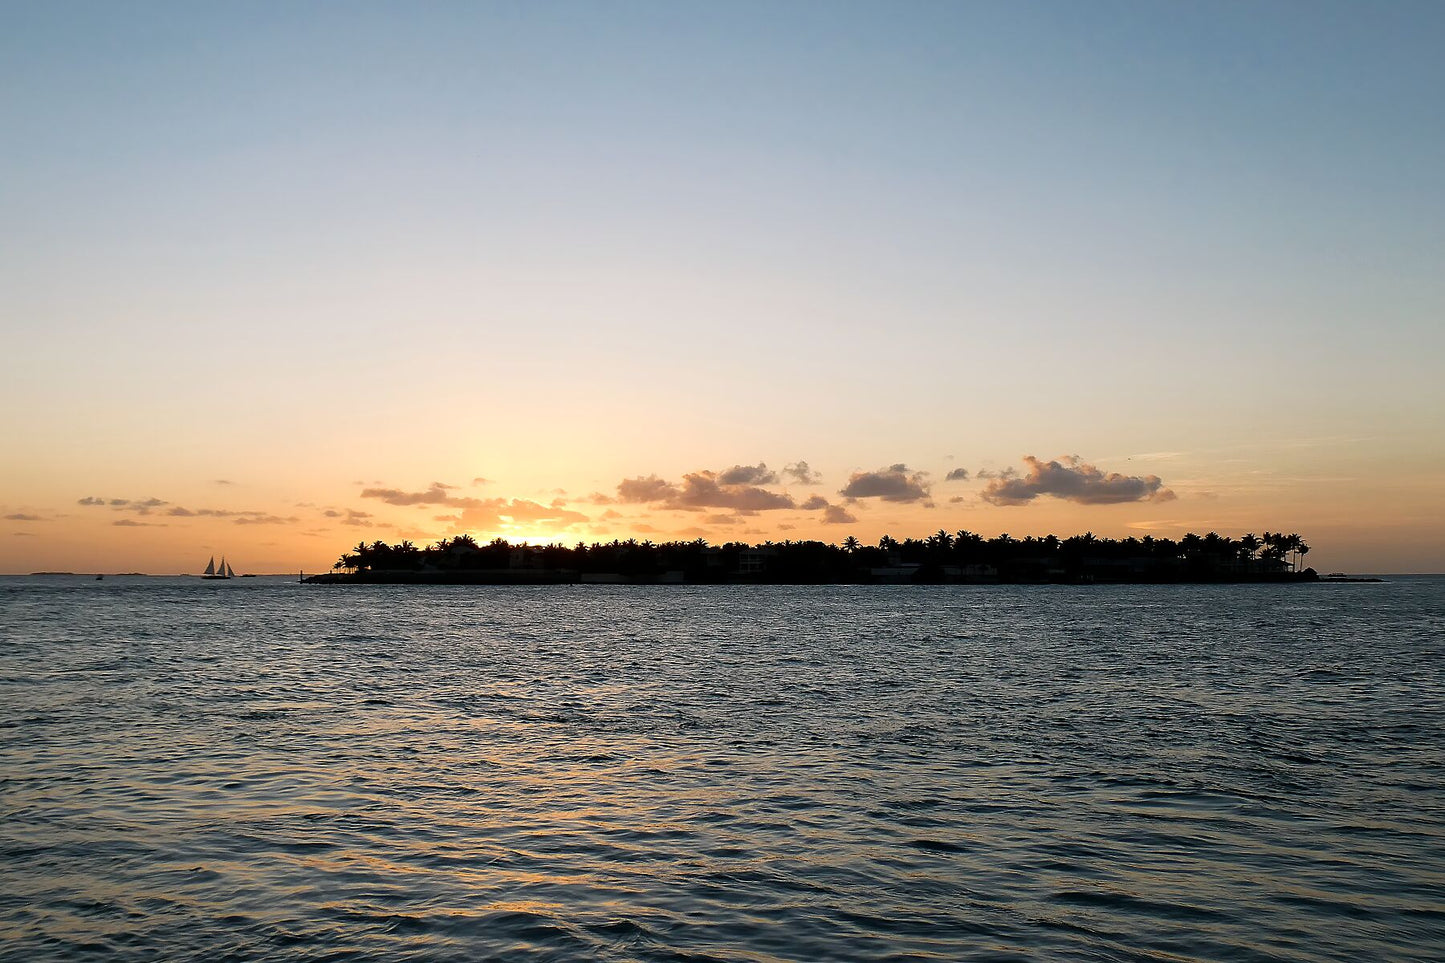 Sunset over a small island